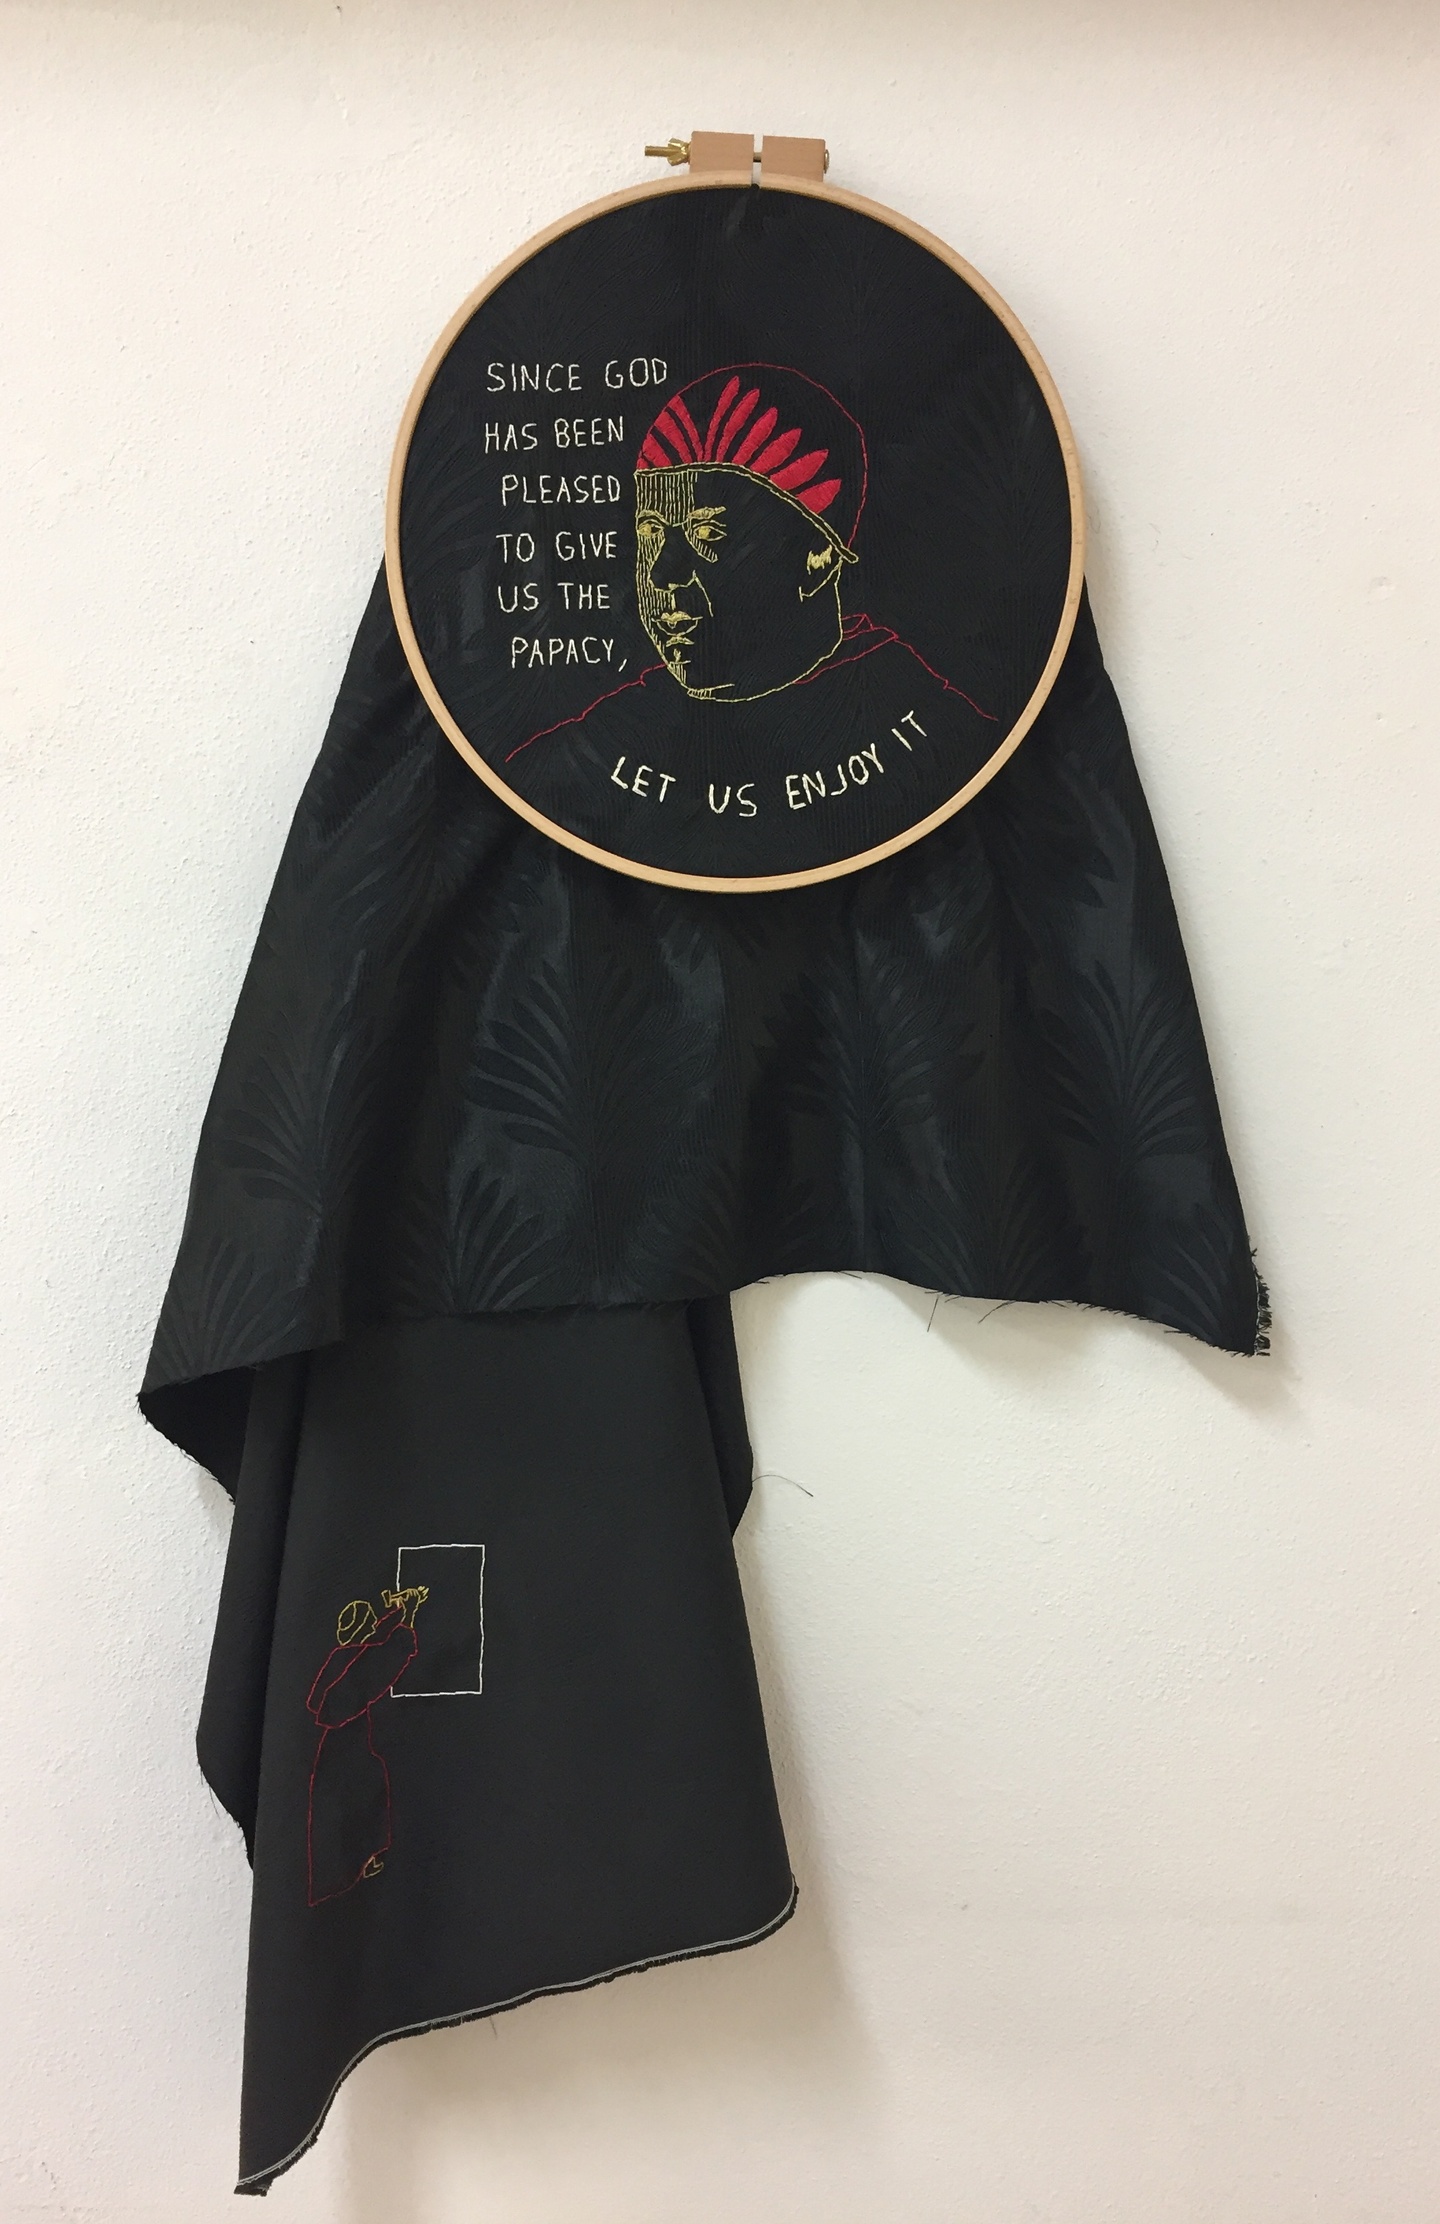 Piece of black cloth in an embroidery hoop, with an embroidered image of the pope's head in the center. Text around it reads "Since God has been pleased to give us the papacy, let us enjoy it." The bottom corner of the fabric has an embroidered image of a monk beginning to engrave a tablet.